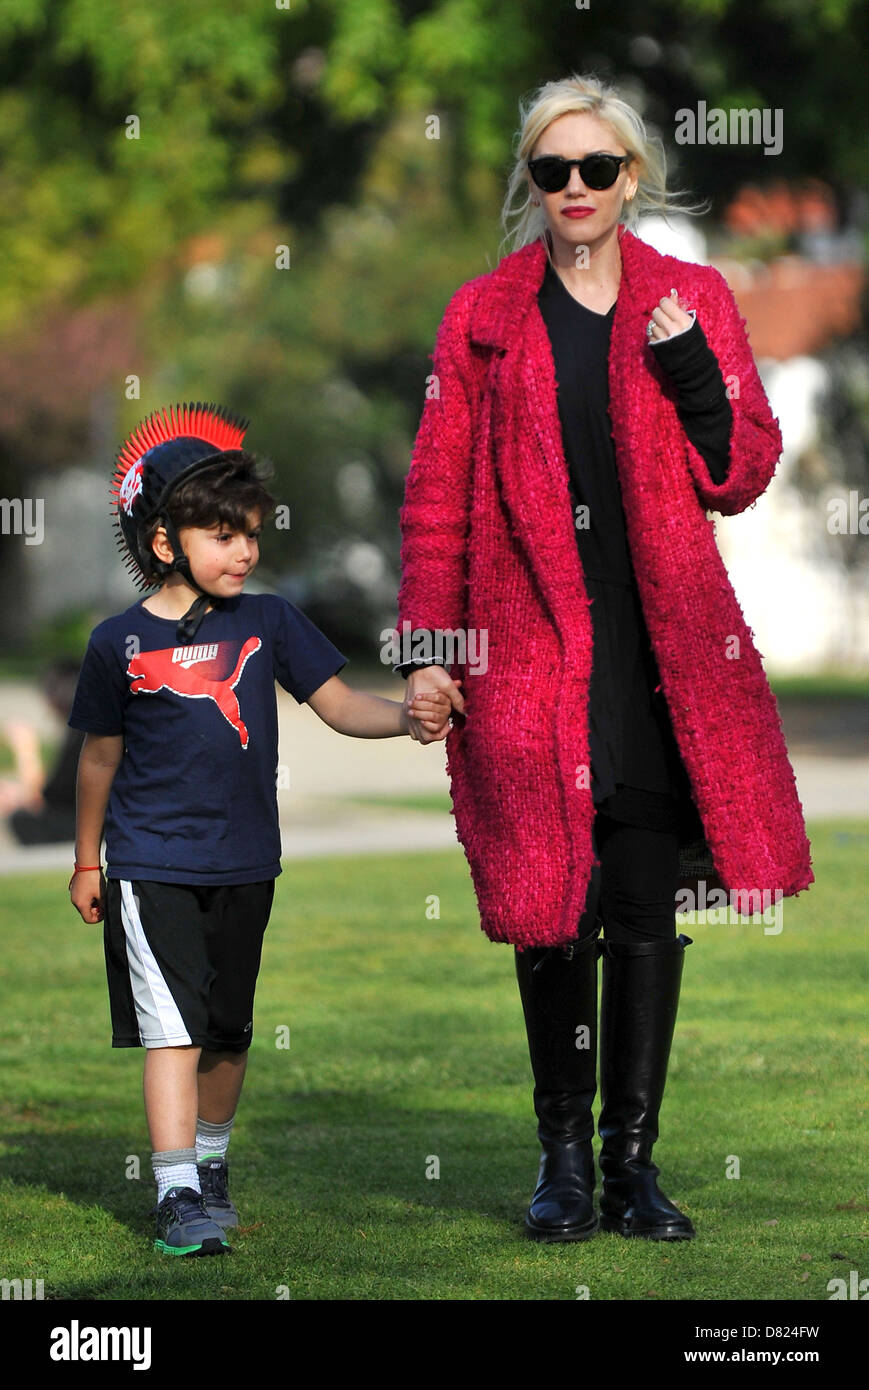 Gwen Stefani and her son Kingston Rossdale spend the day at a party in Santa Monica park Los Angeles, California - 18.02.12 Stock Photo